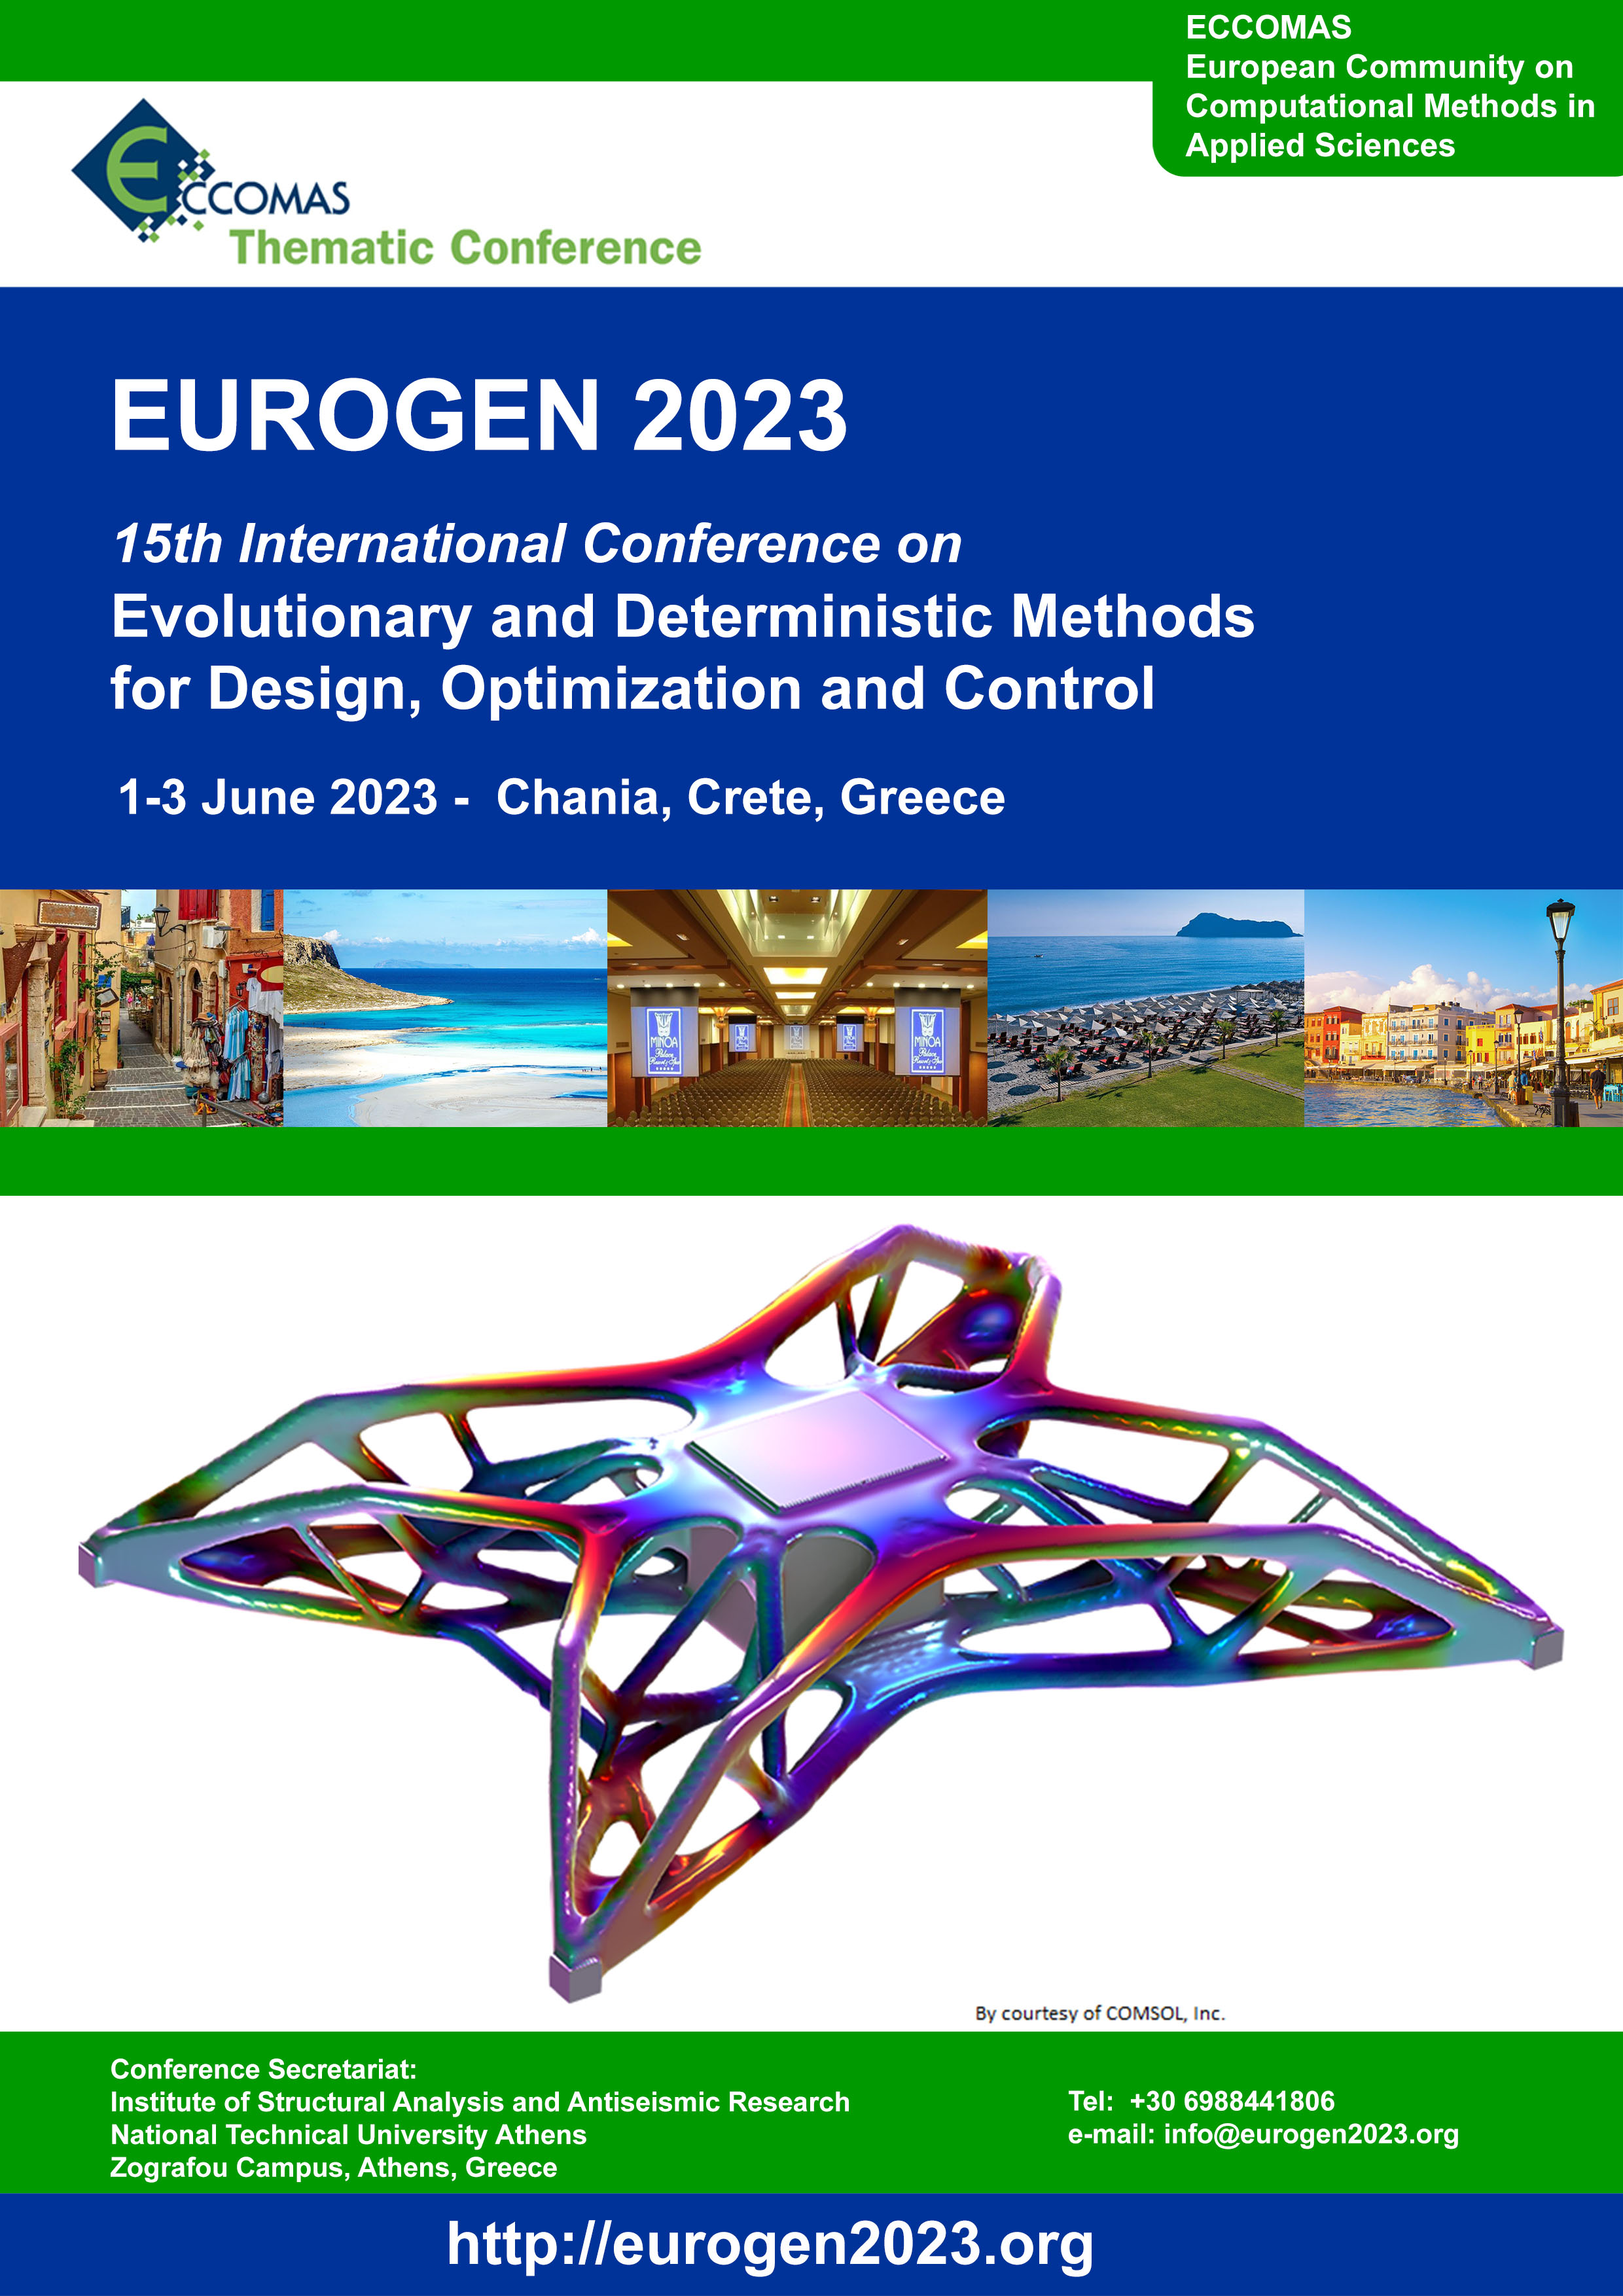 15th International Conference on Evolutionary and Deterministic Methods for Design, Optimization and Control (EUROGEN 2023)